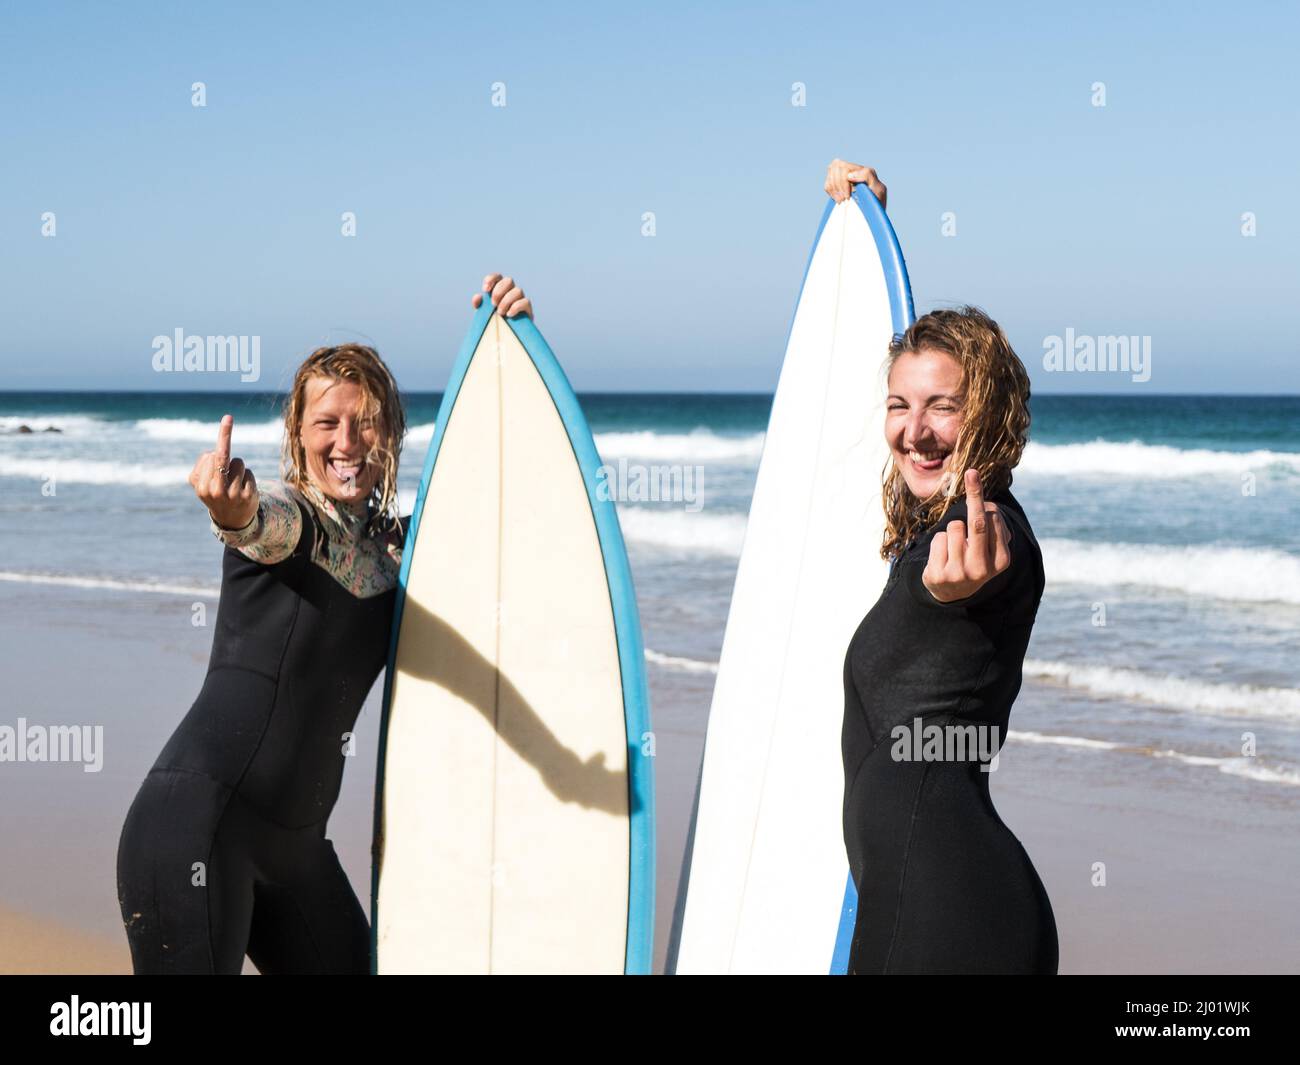 Surfer females on the beach showing middle finger Stock Photo